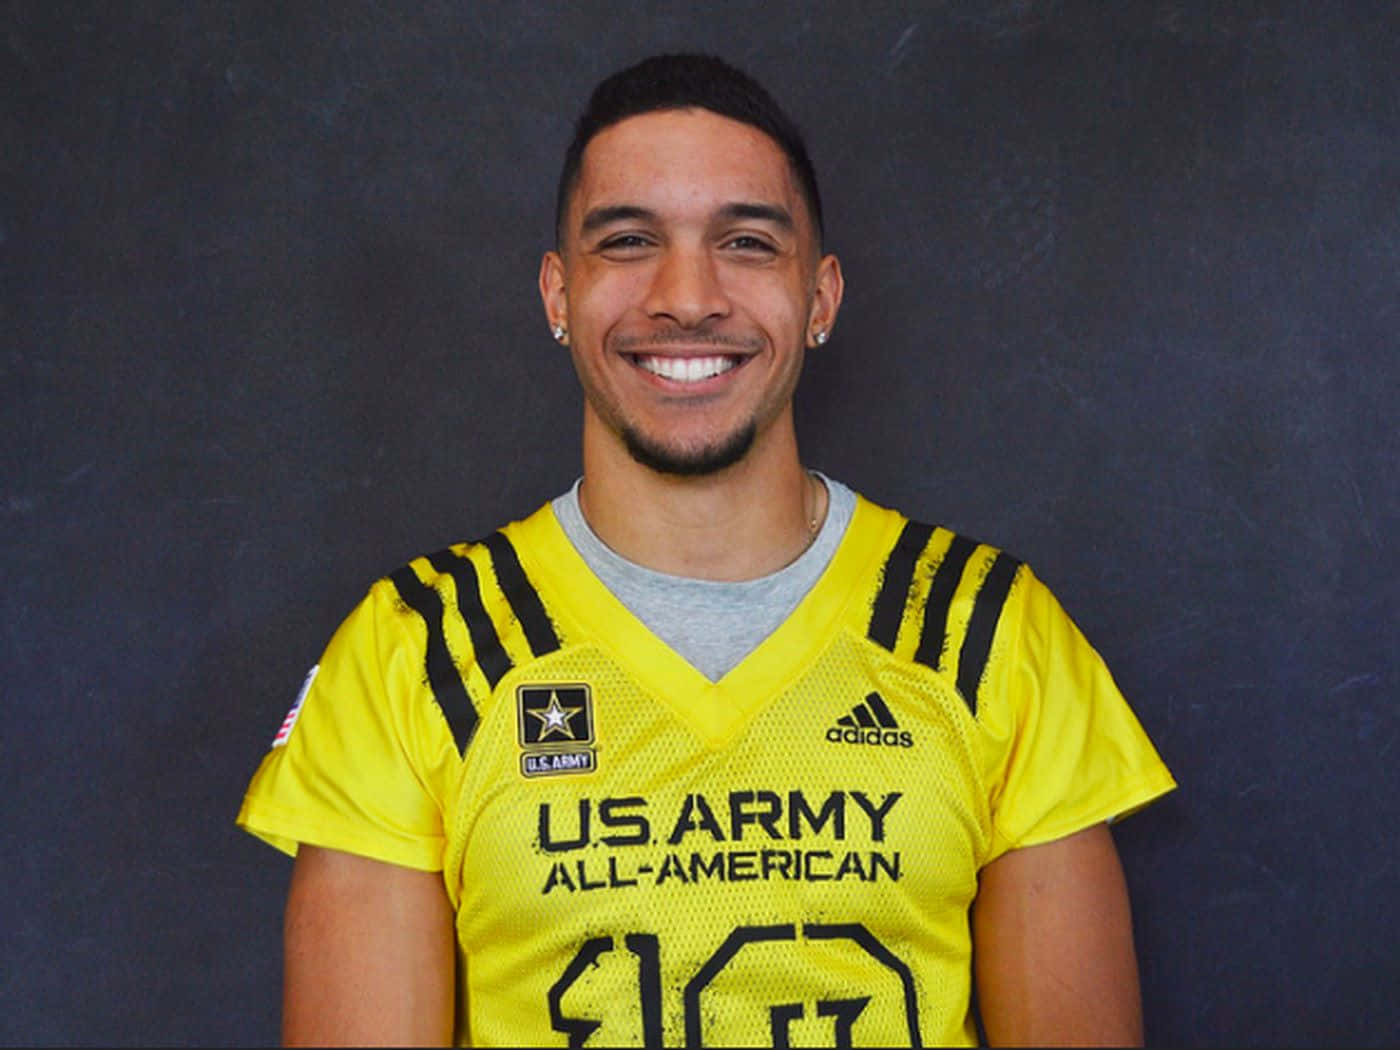 Smiling Athletein U S Army All American Jersey Wallpaper